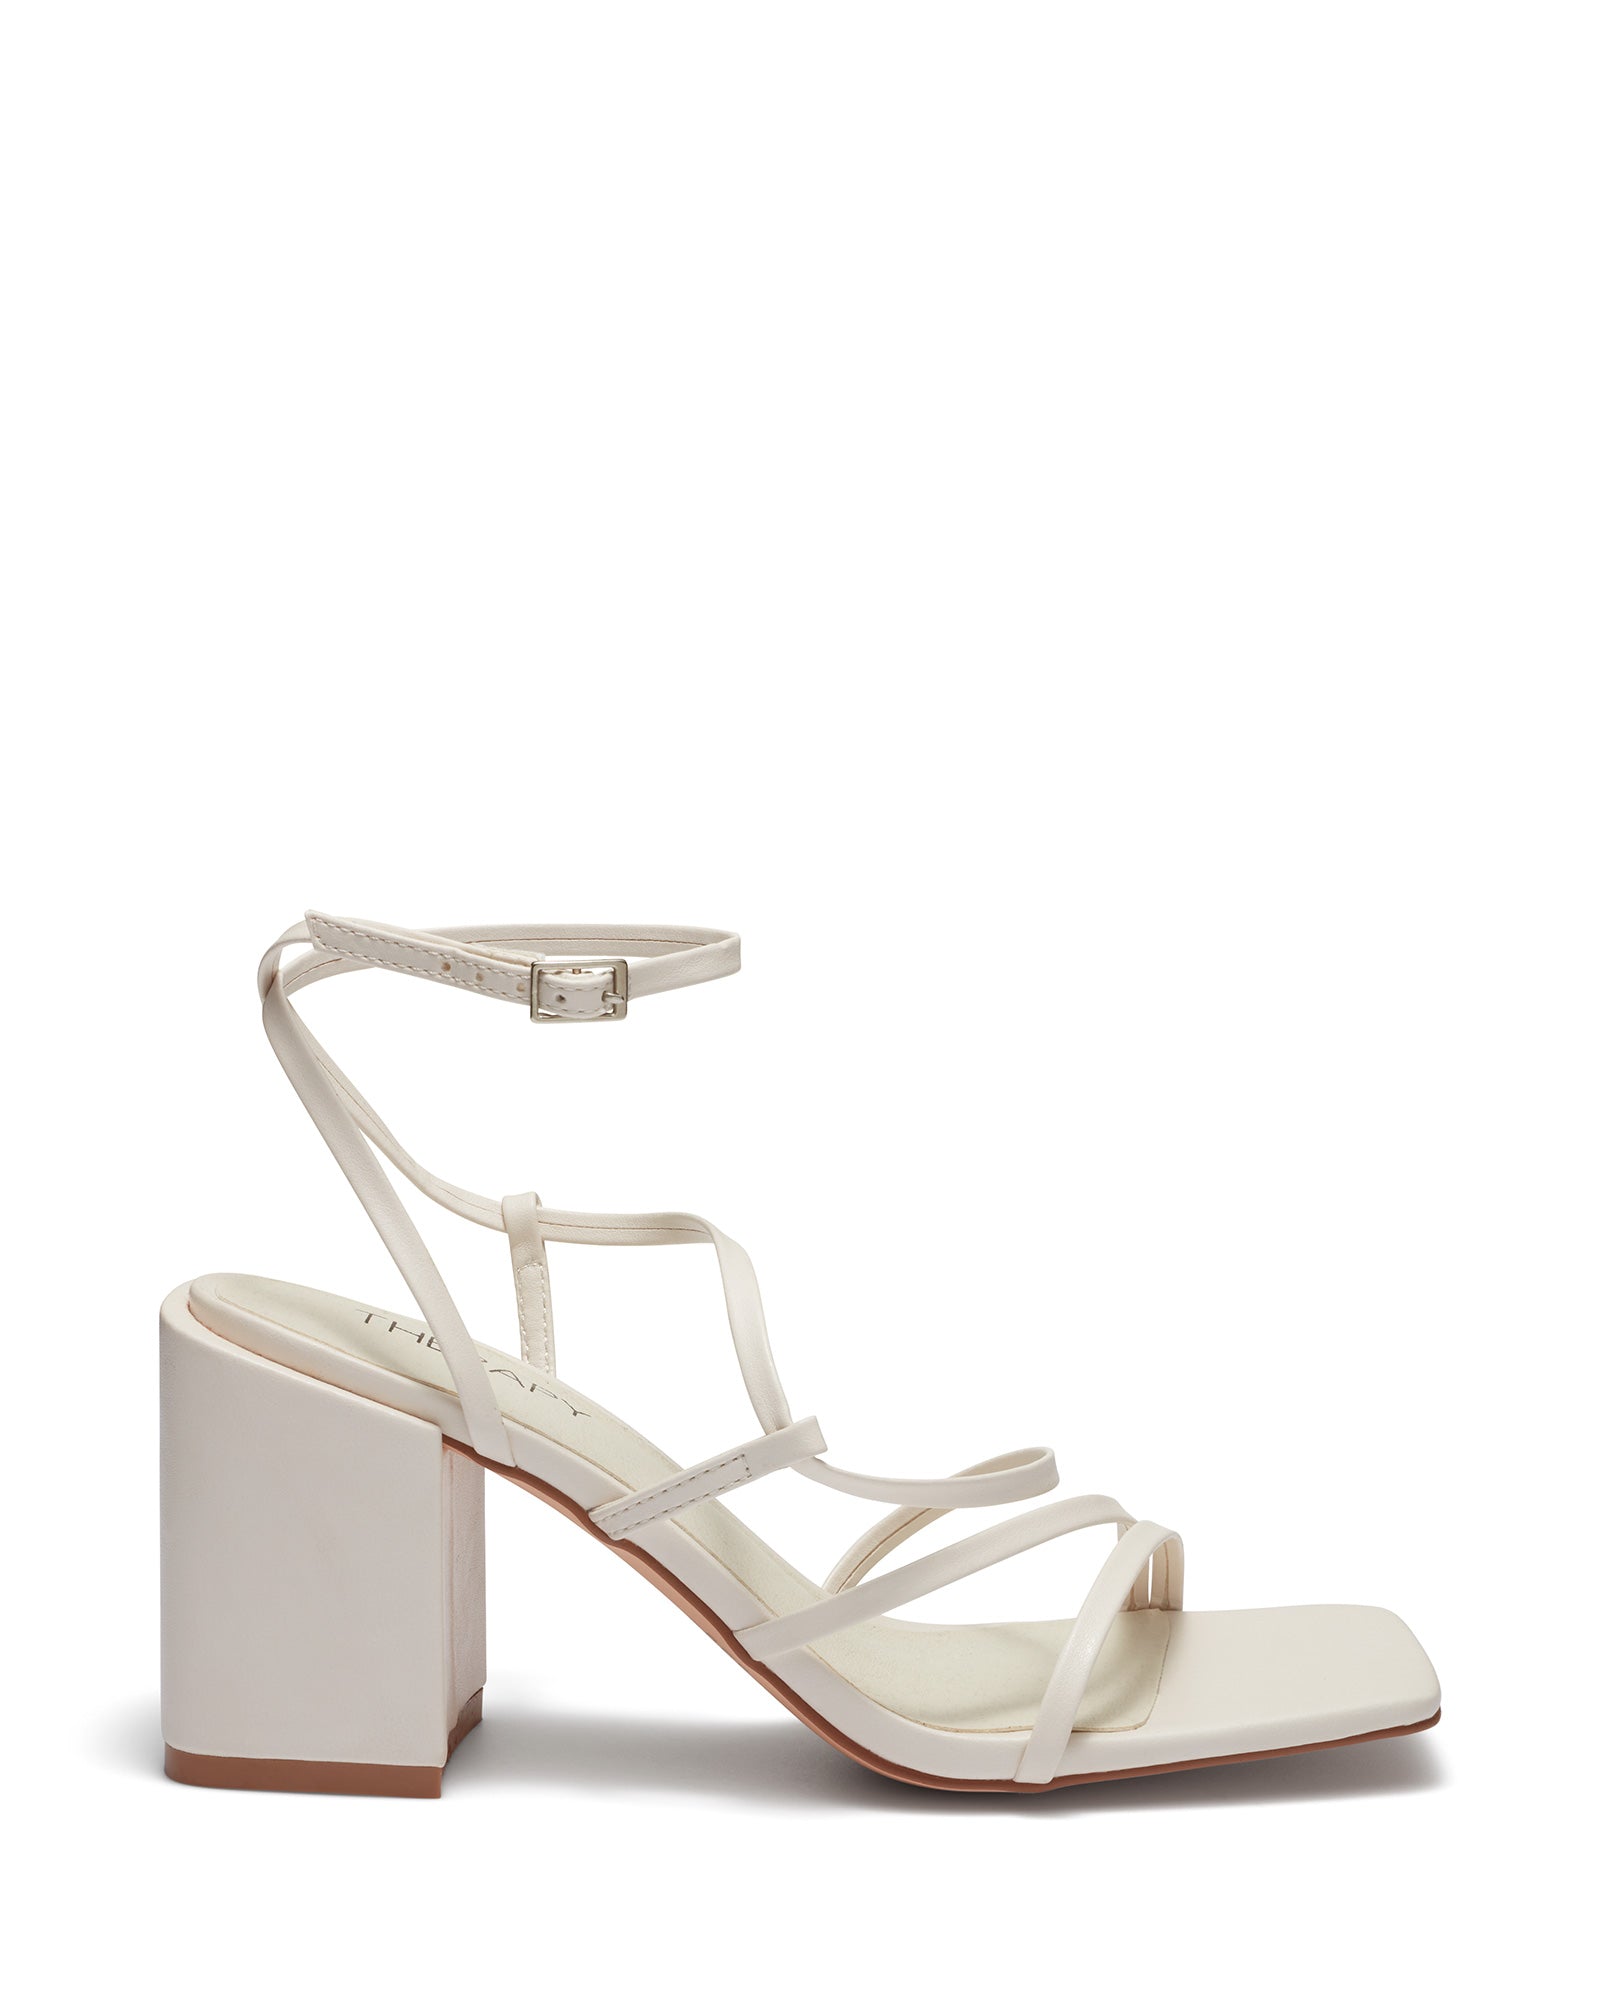 Therapy Shoes Bambi Bone | Women's Heels | Sandals | Strappy | Block